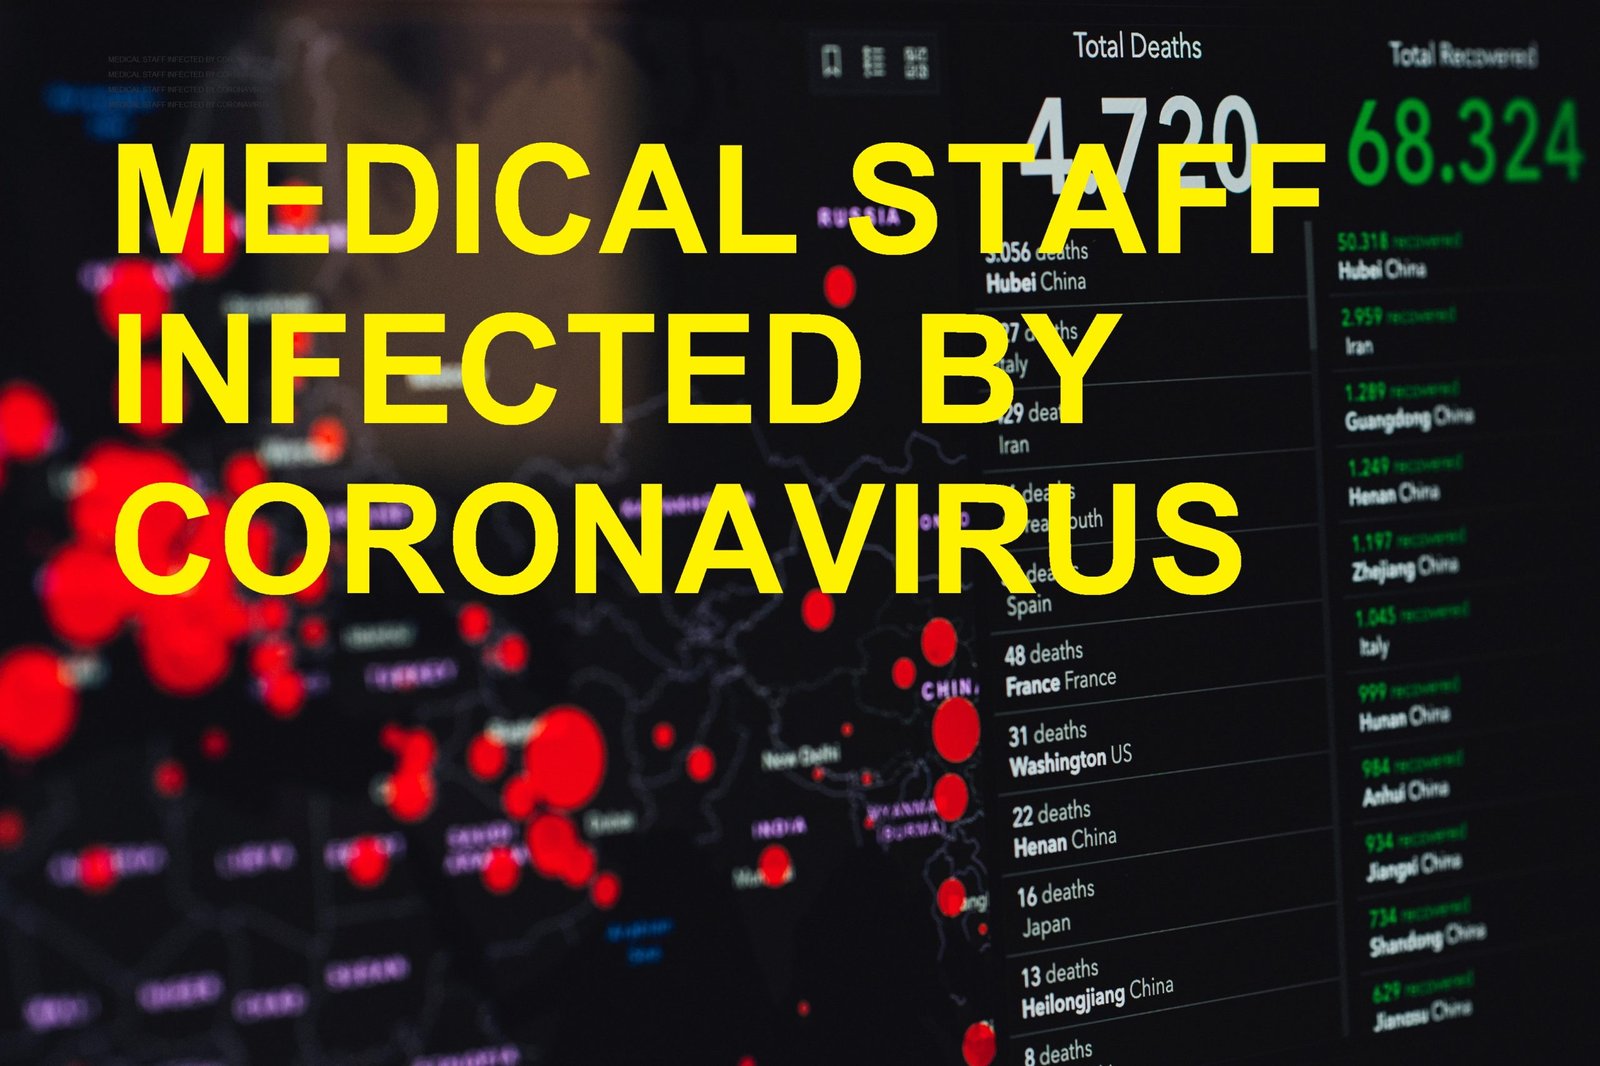 MEDICAL STAFF INFECTED BY CORONAVIRUS